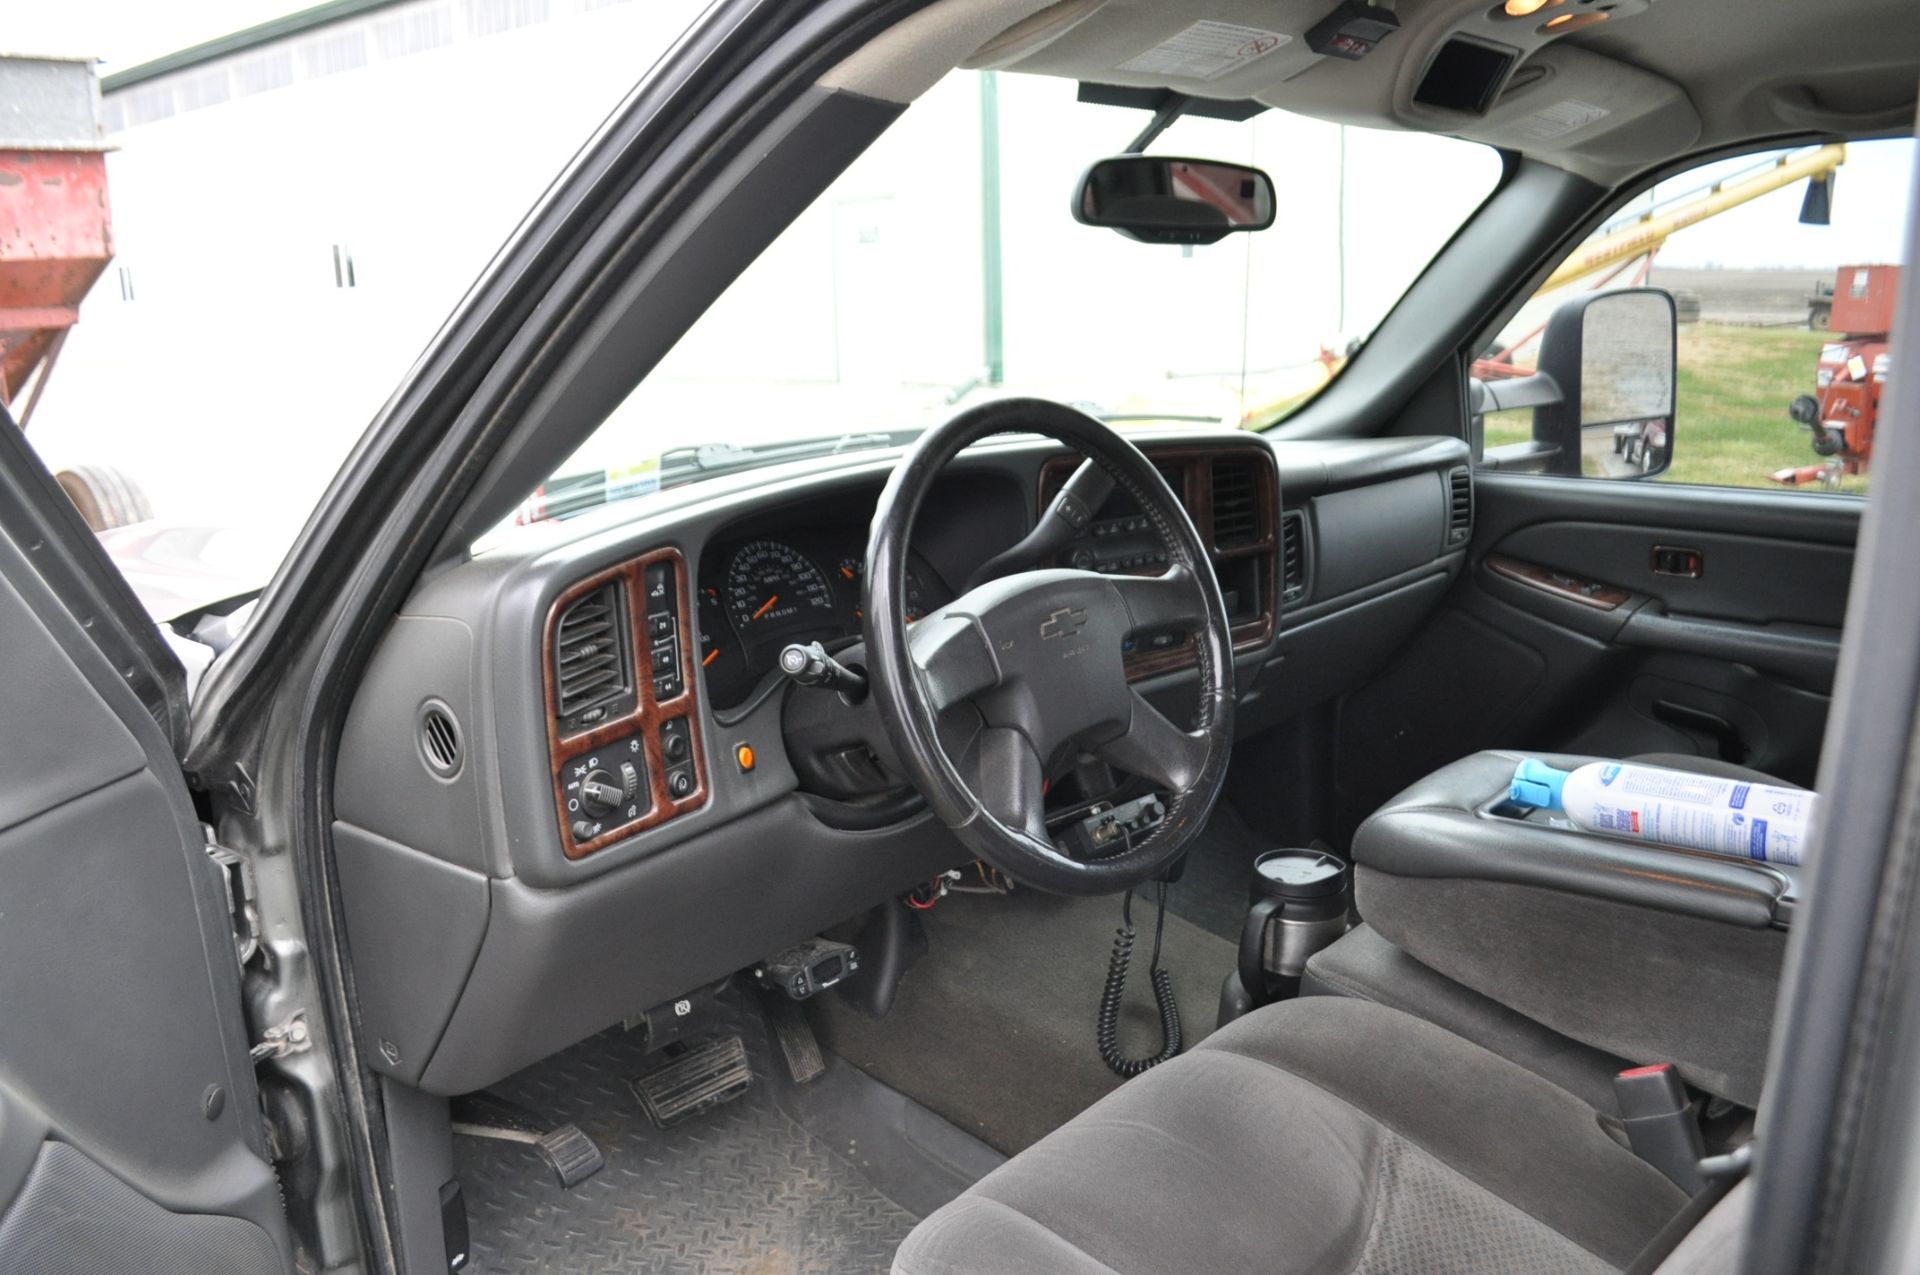 2006 Chevy 2500 HD Duramax pick-up truck, 4x4, short bed, auto, cloth interior, Rhino bed liner, B & - Image 7 of 20